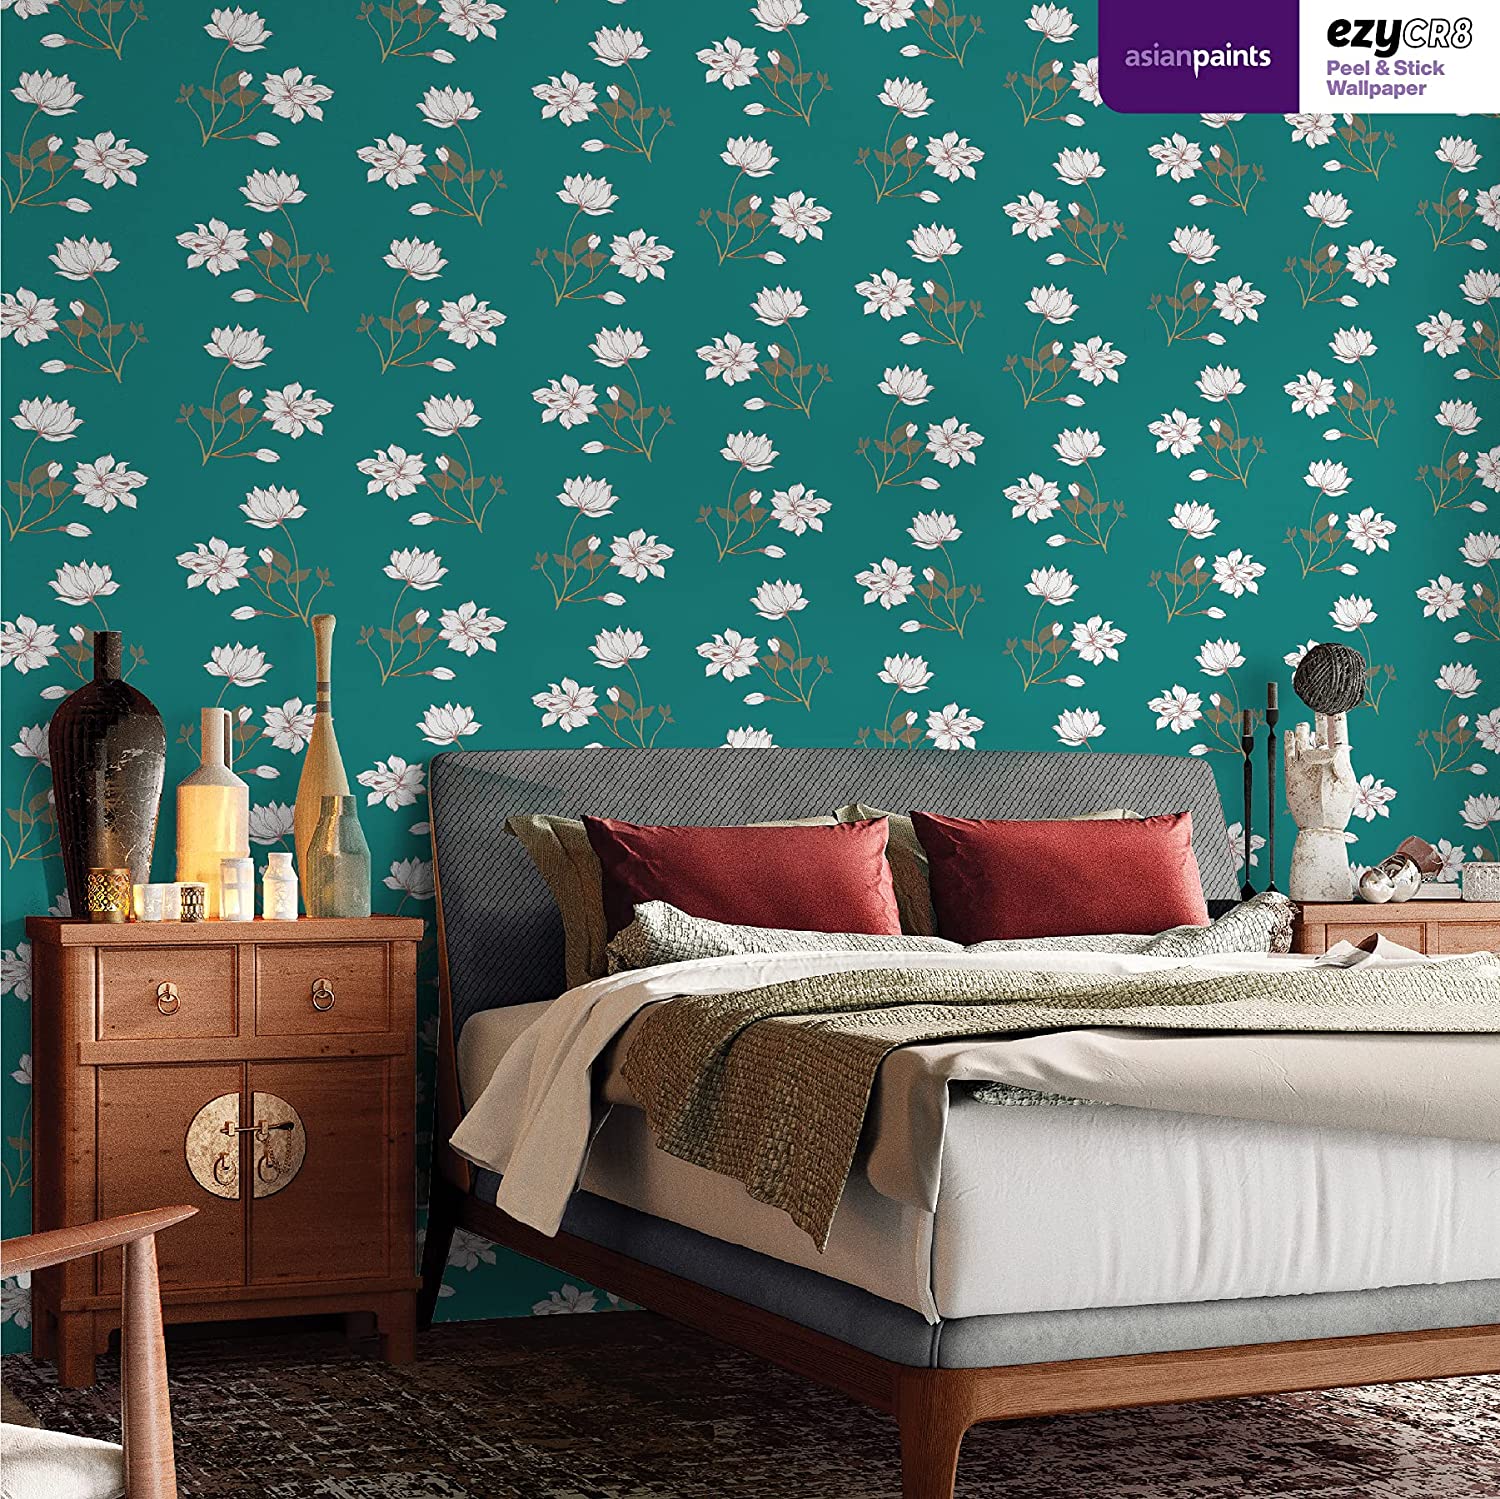 All Your Design Wallpaper Roll  Self Adhesive Roll Wallpaper  Wall S   NavaEarth  New Zealand